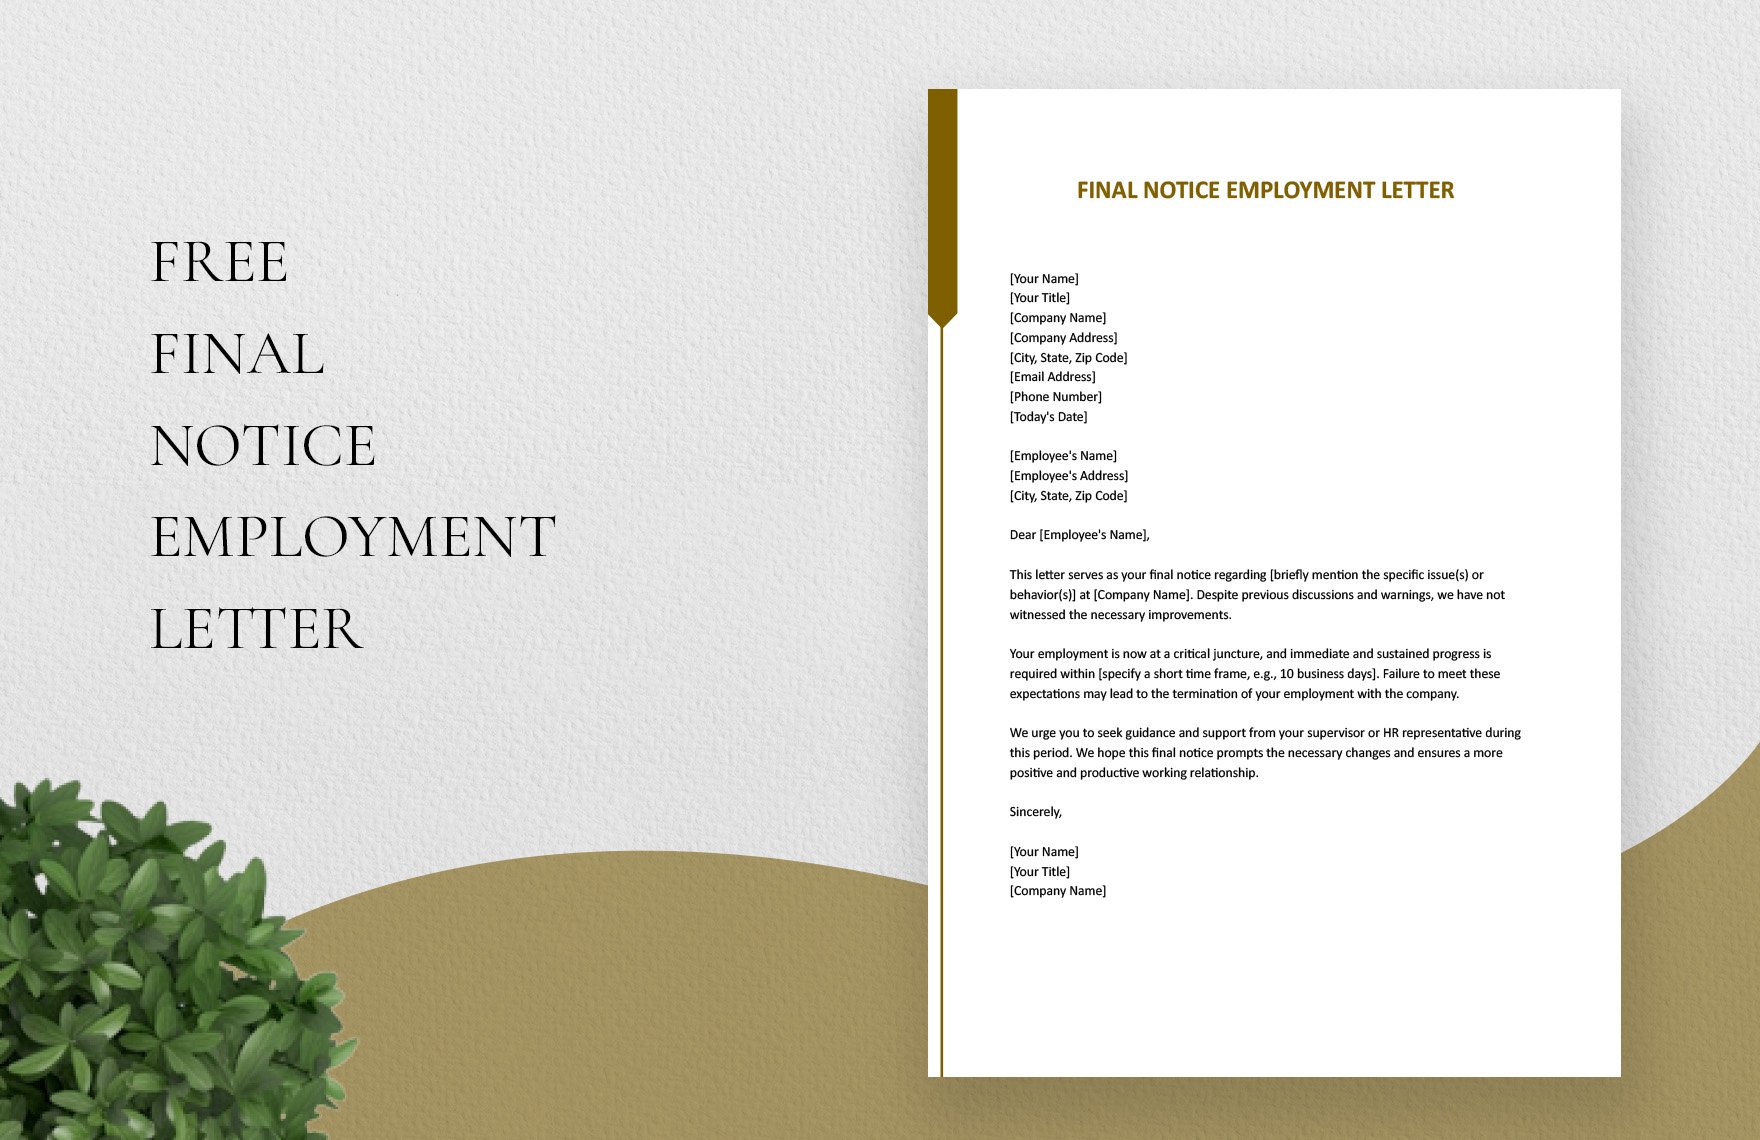 Free Final Notice Employment Letter